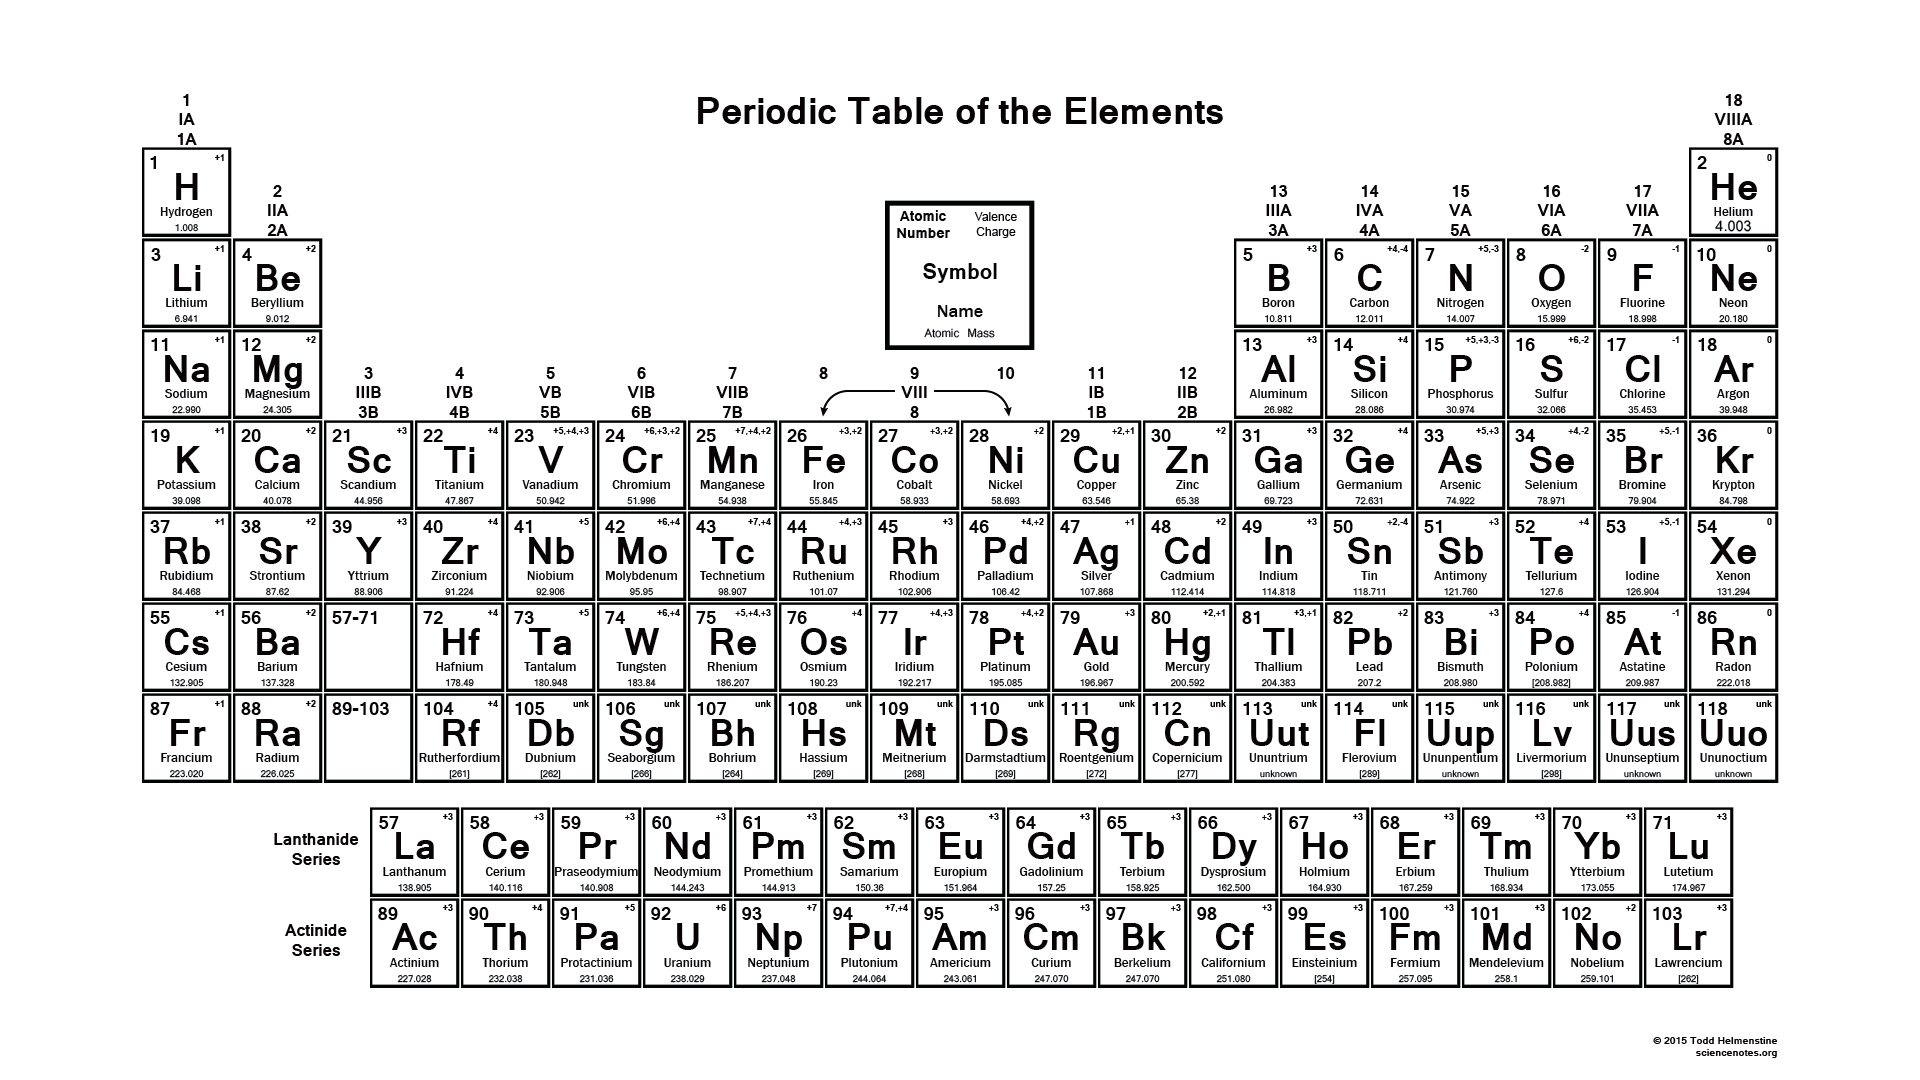 32_The Periodic Table of Elements.png